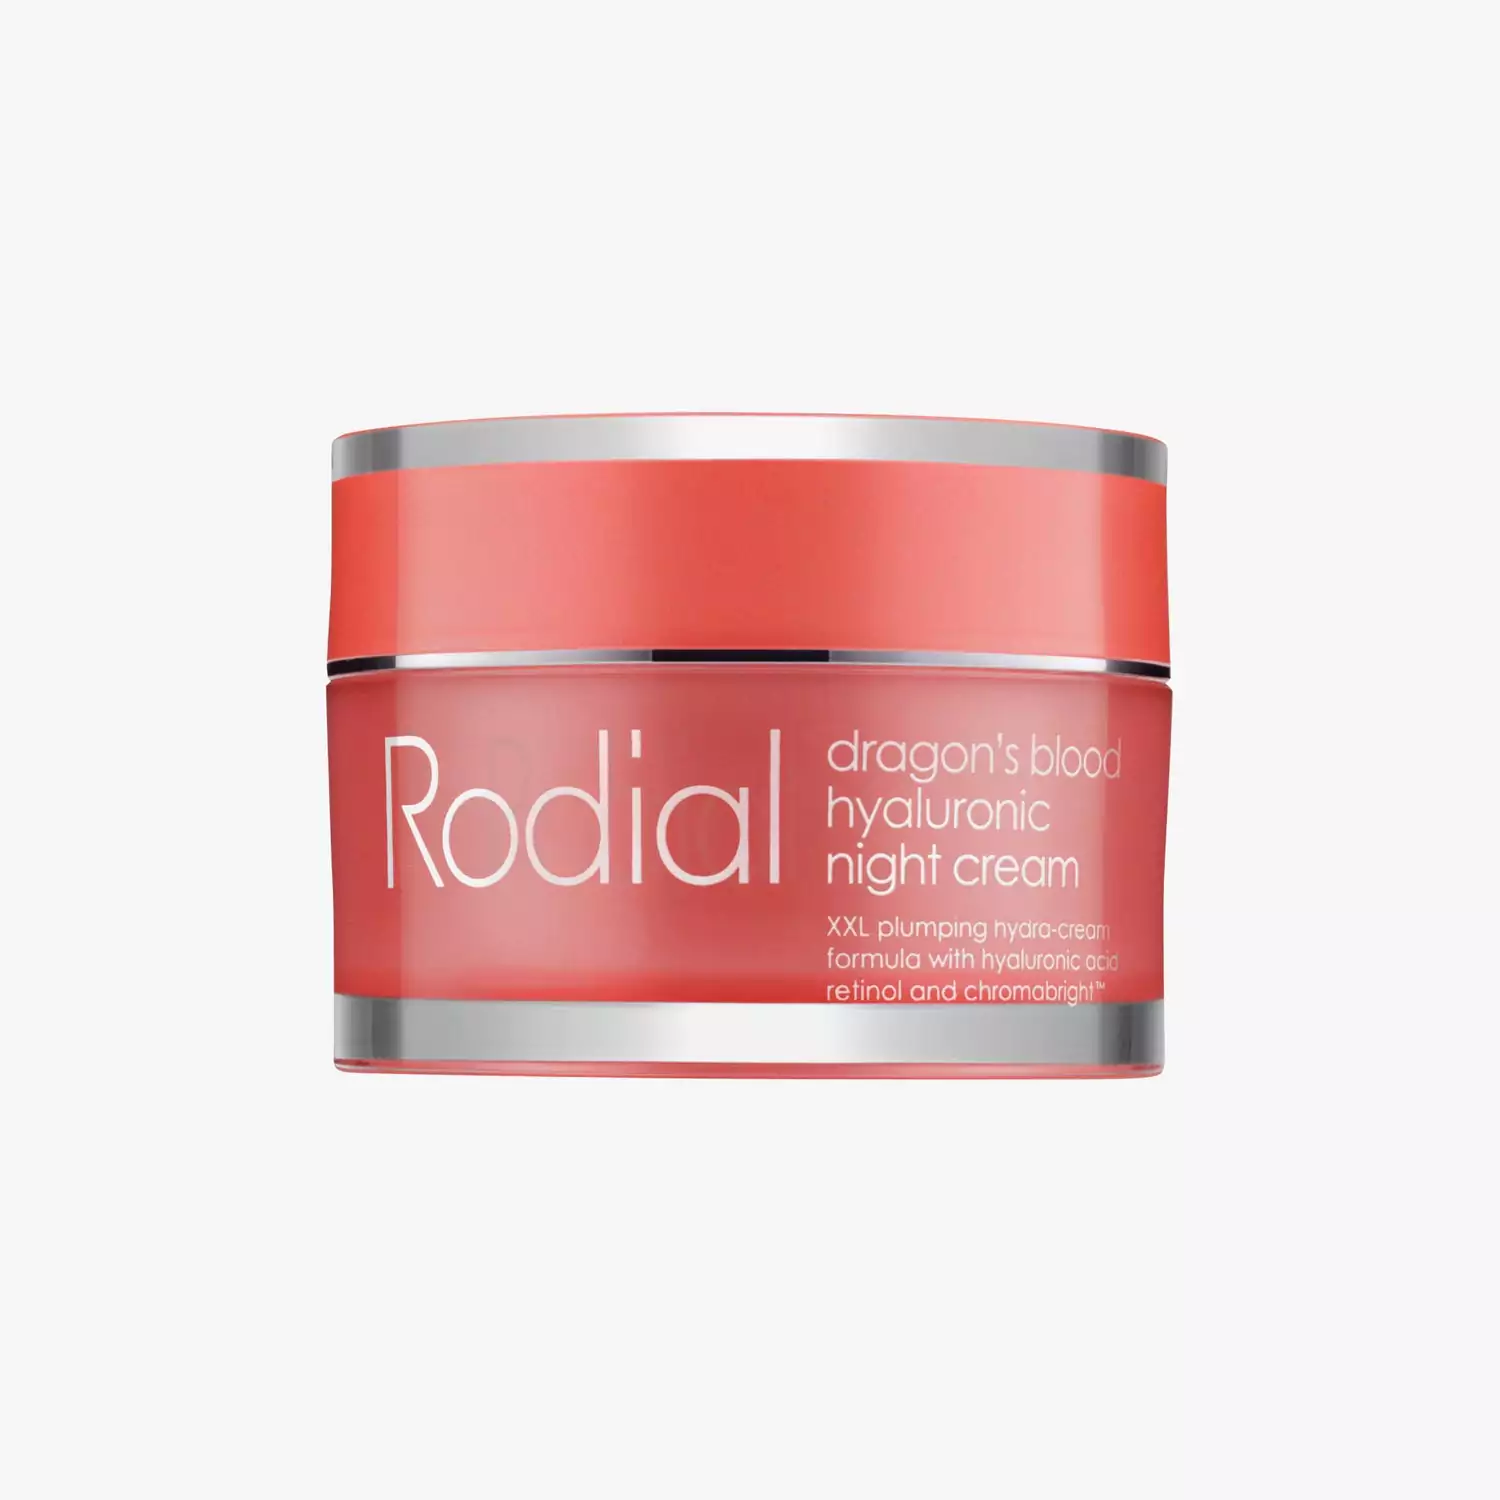 Rodial Dragon's blood hyaluronic night cream Discounts and Cashback